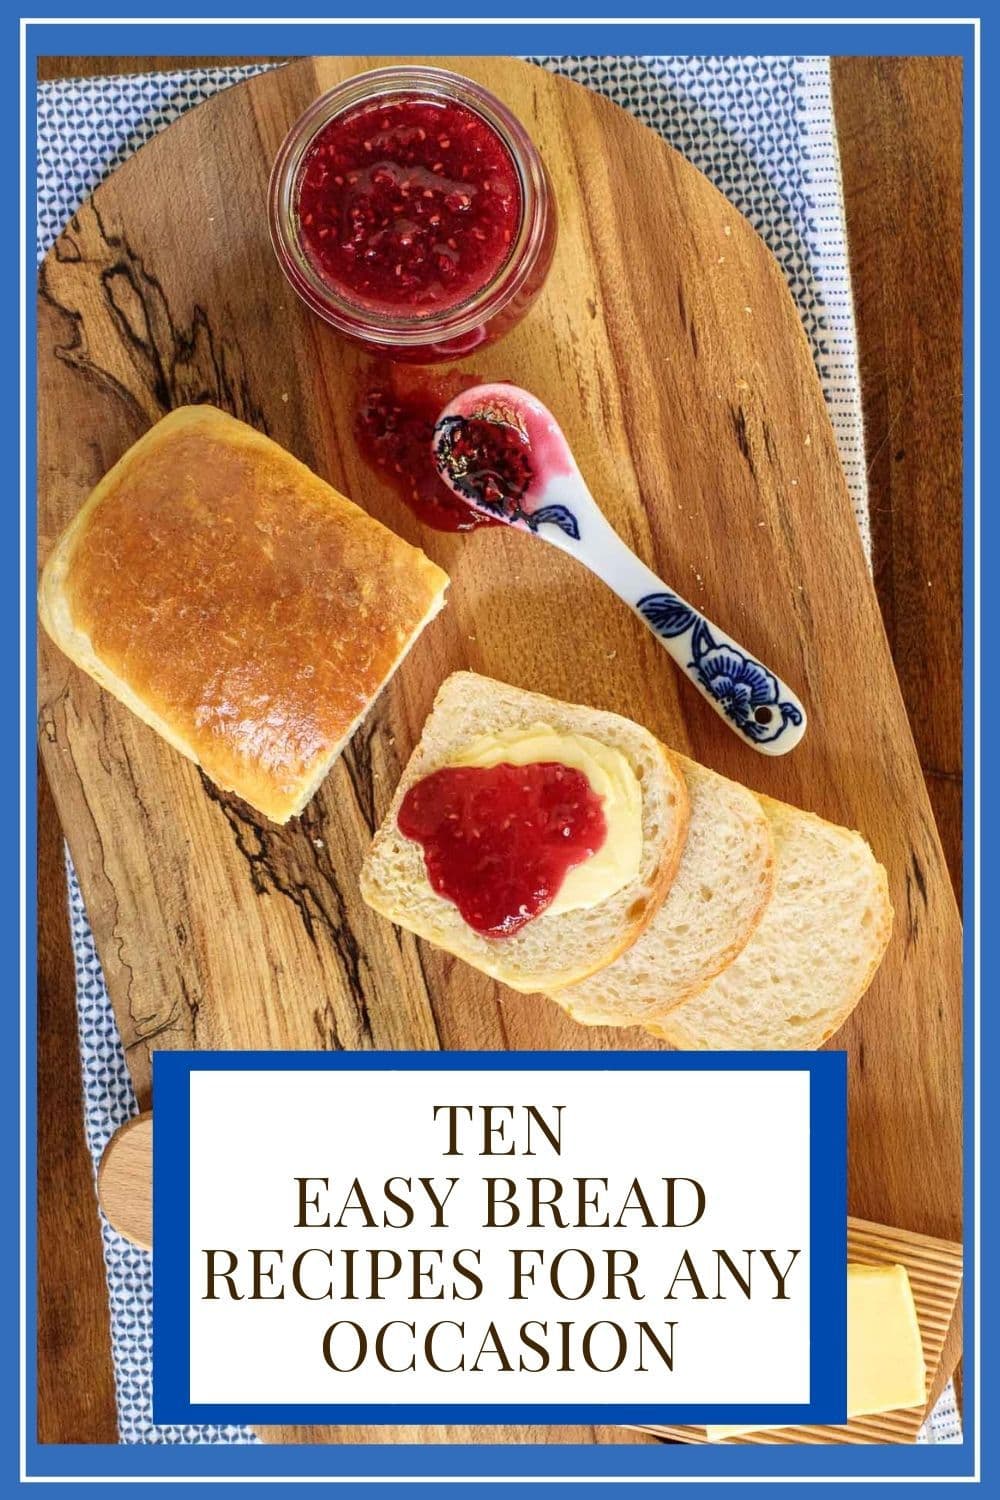 No Need to Knead! Easy Bread Recipes for Every Occasion!